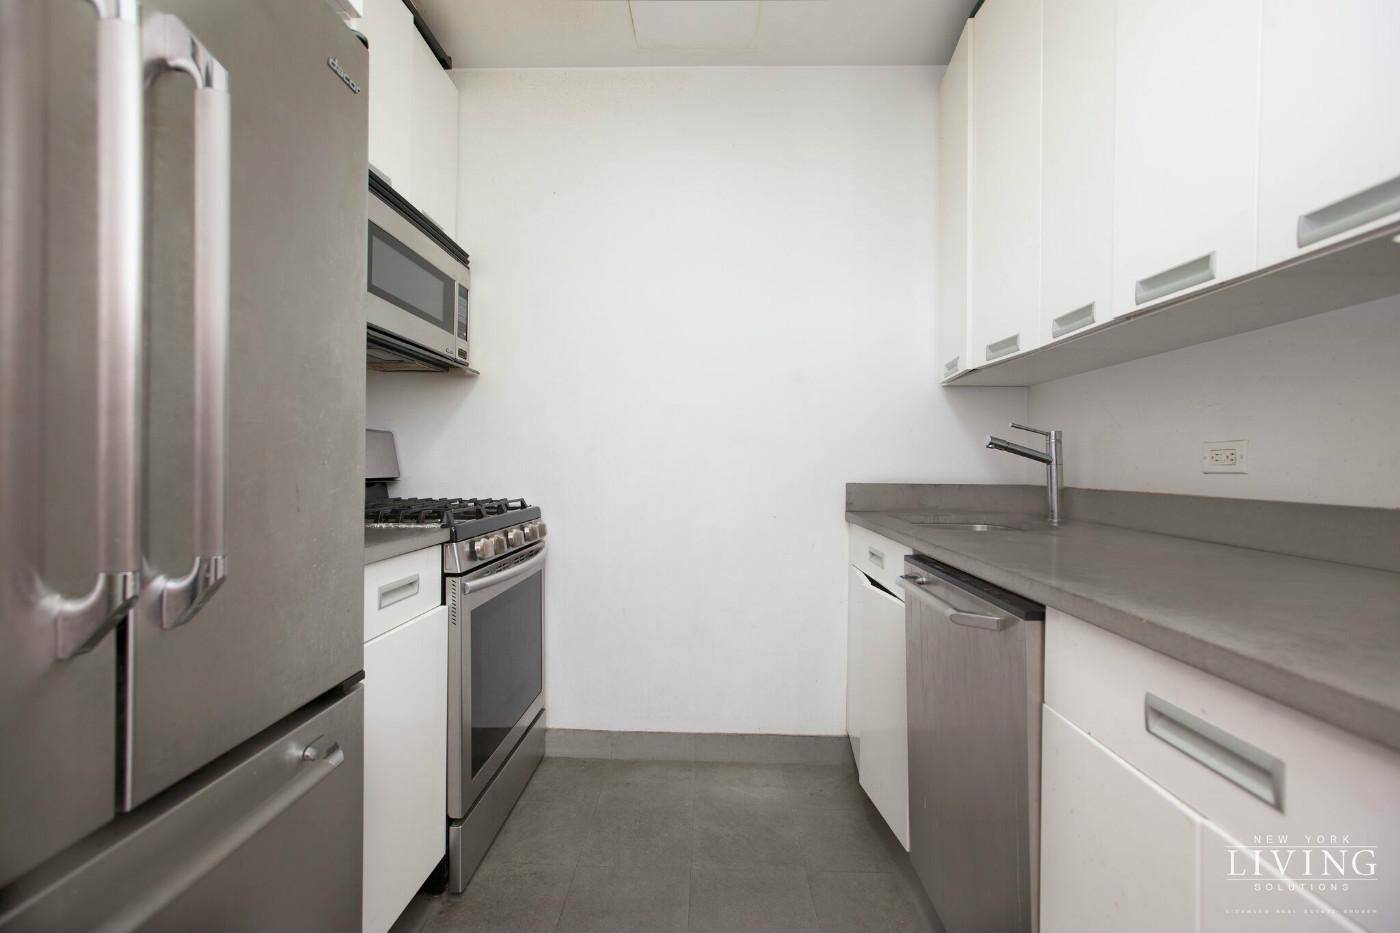 Welcome to apartment 410 99 John Deco LoftsApartment Features and AmenitiesFormerly a Studio With Home Office, this apartment was converted to a flexible Two bedroom with distinct areas for dining, ...